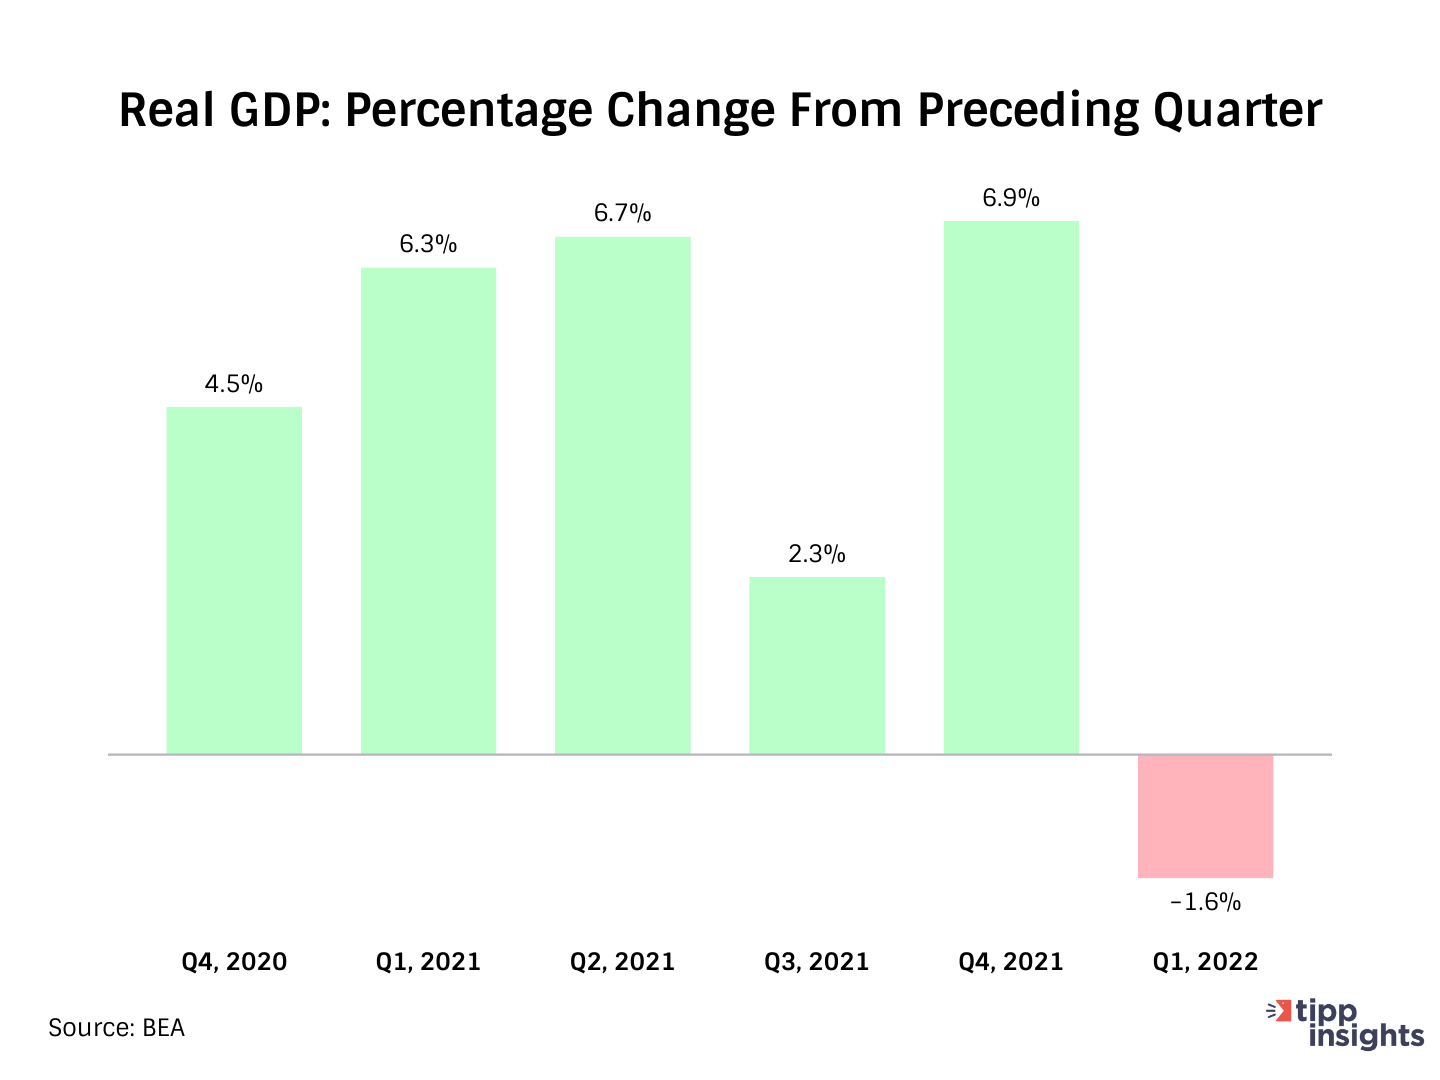 BEA: Real GDP precentage change from proceeding quarter